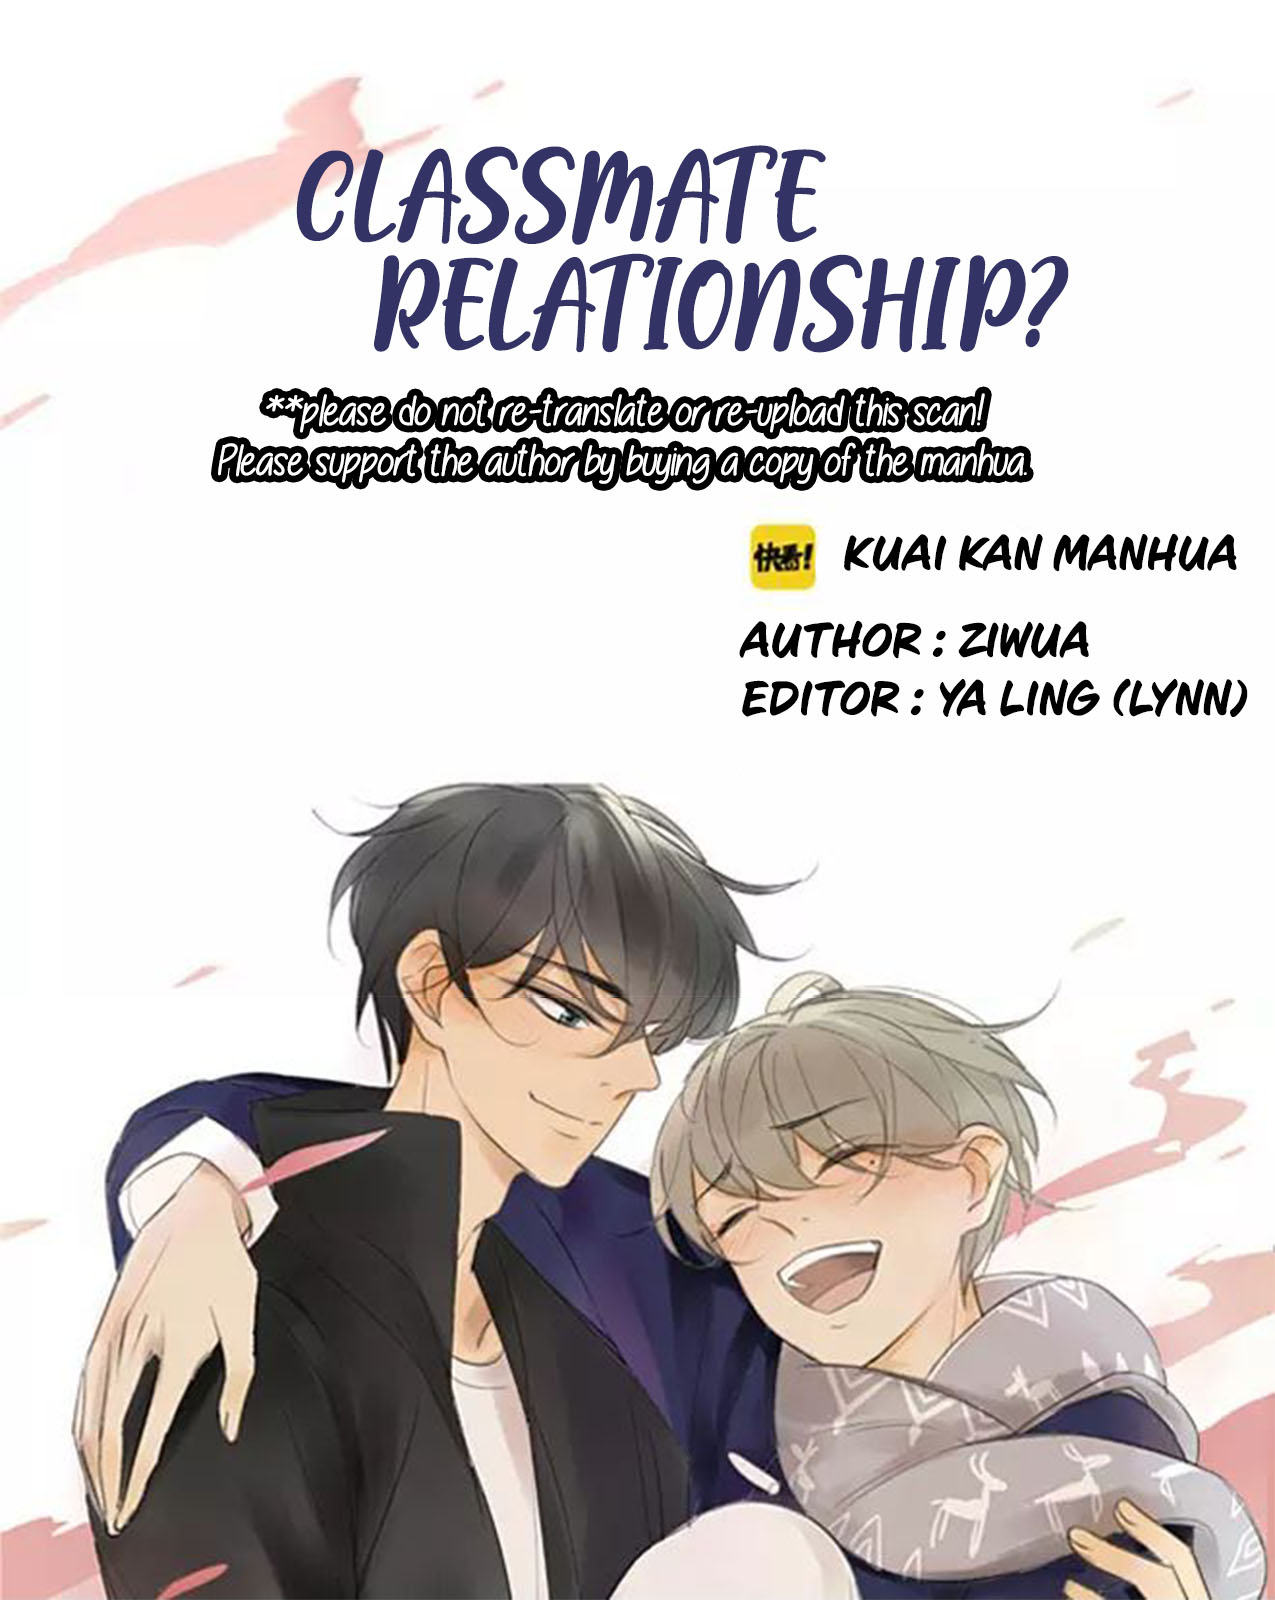 Classmate Relationship? Ch. 17 When two people cross paths